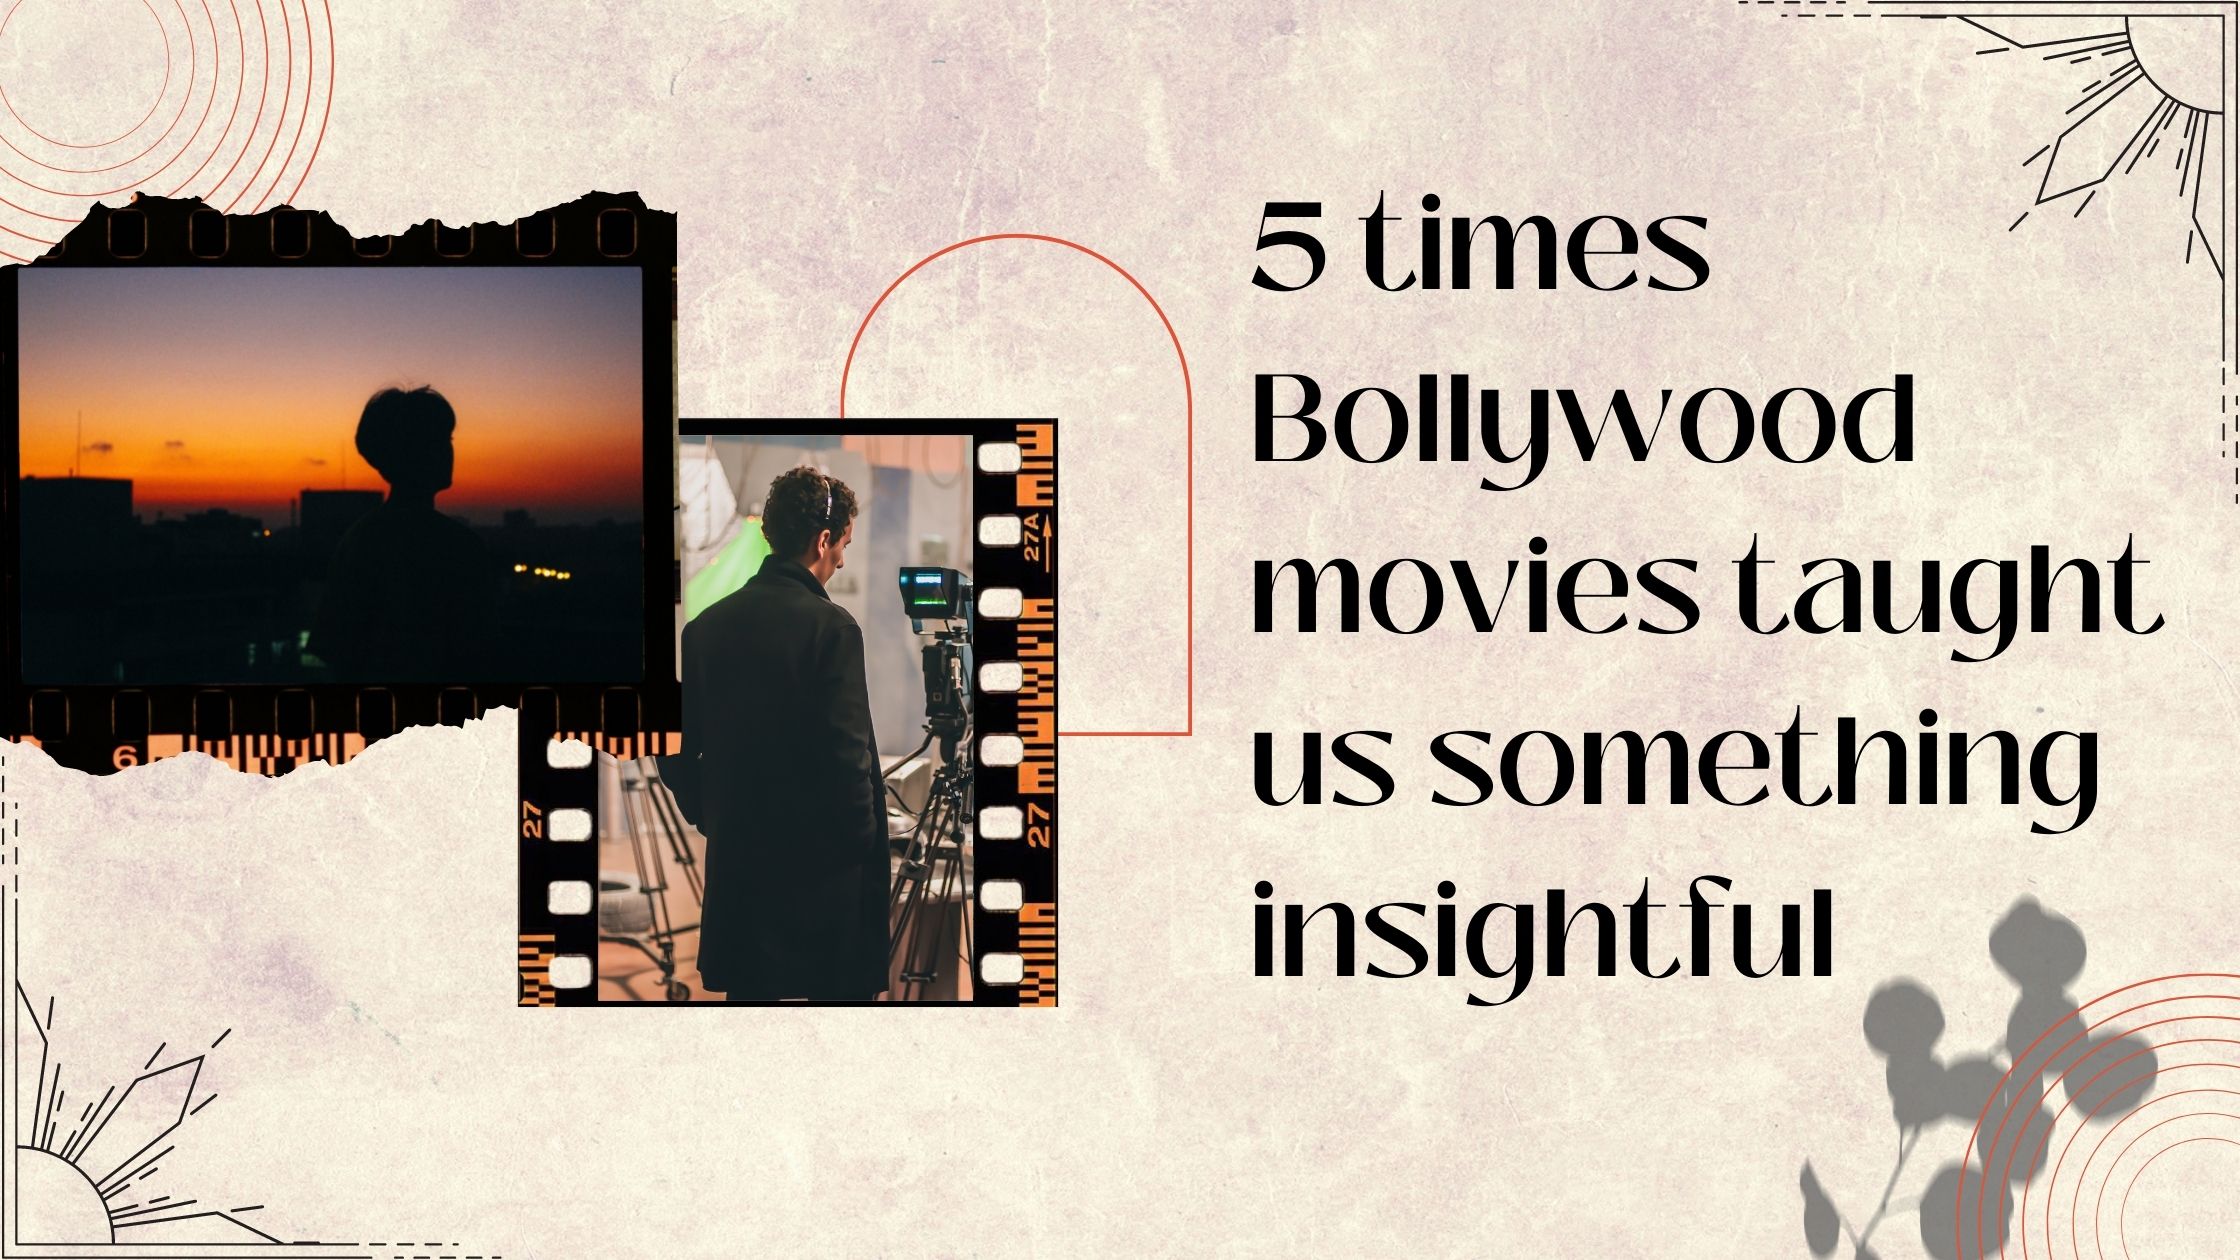 5 times Bollywood movies taught us something insightful